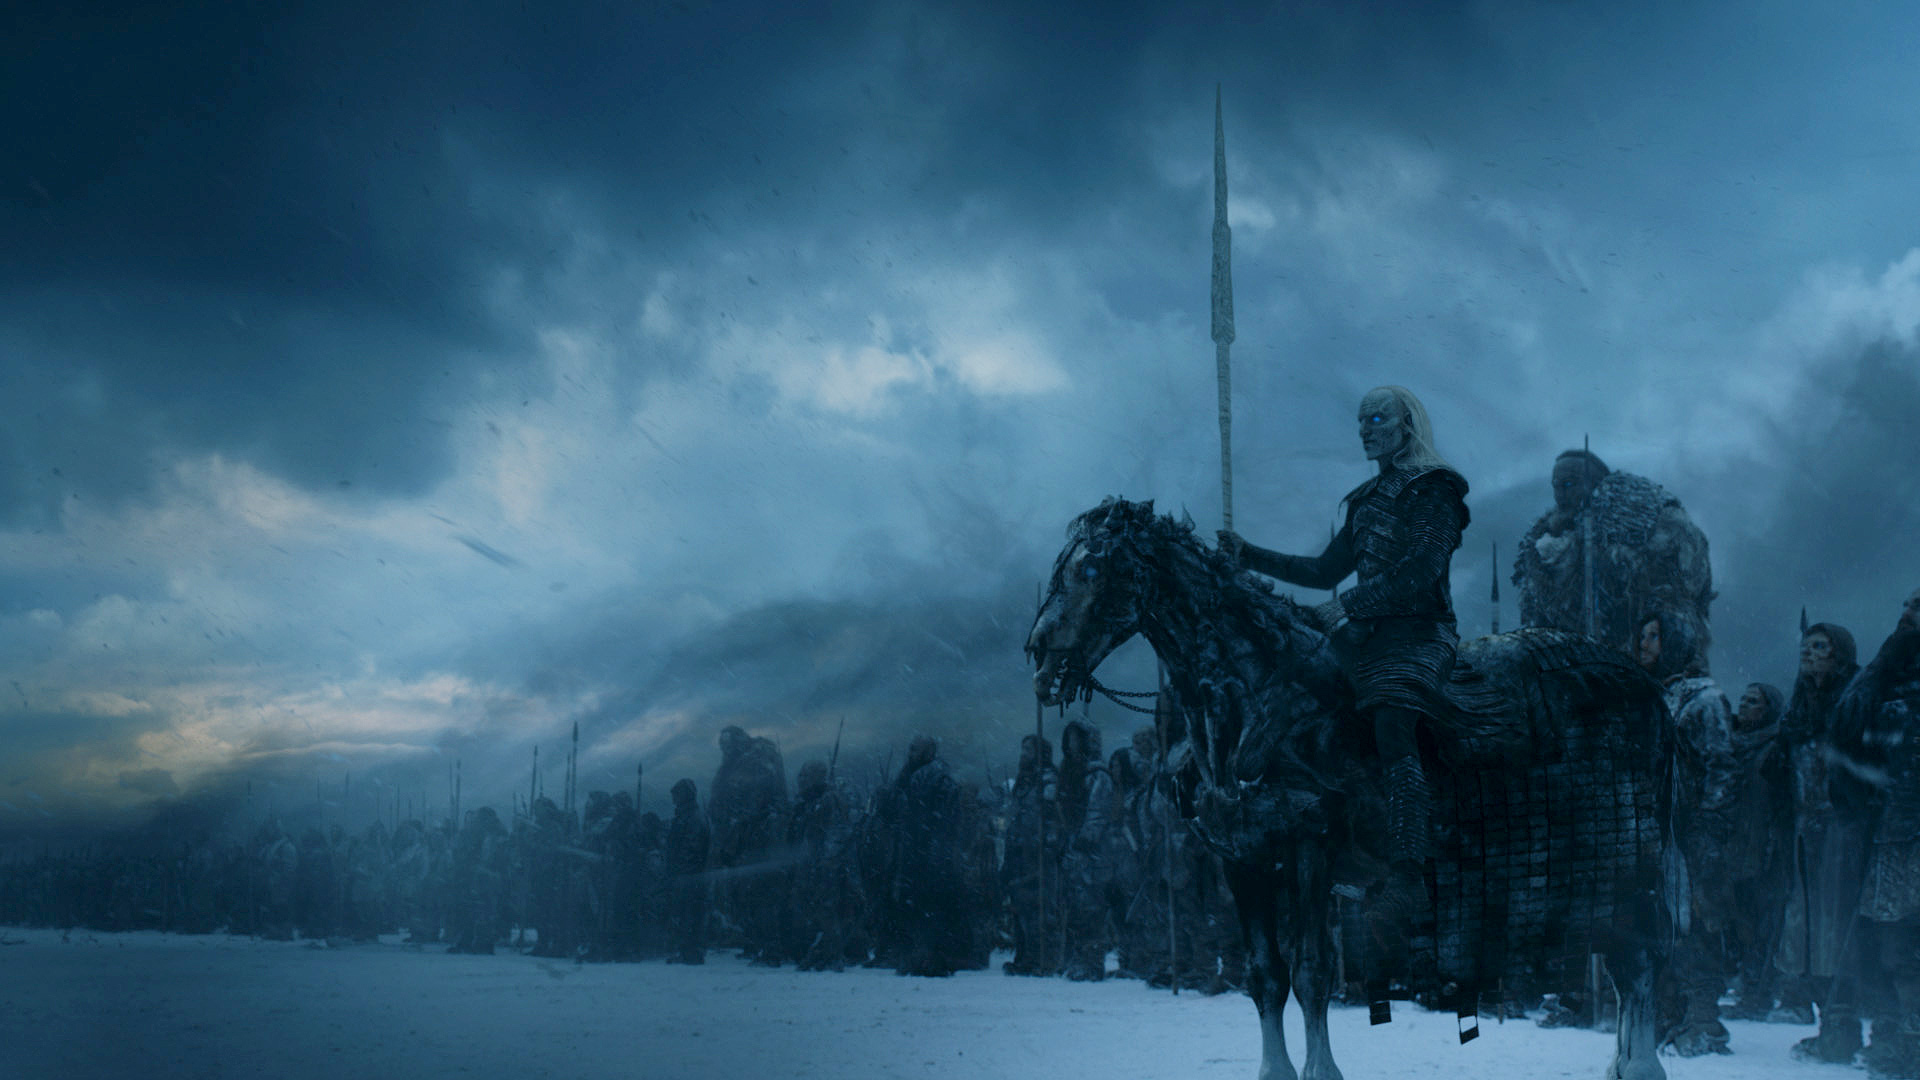 'Game of Thrones' Season Seven ends on HBO